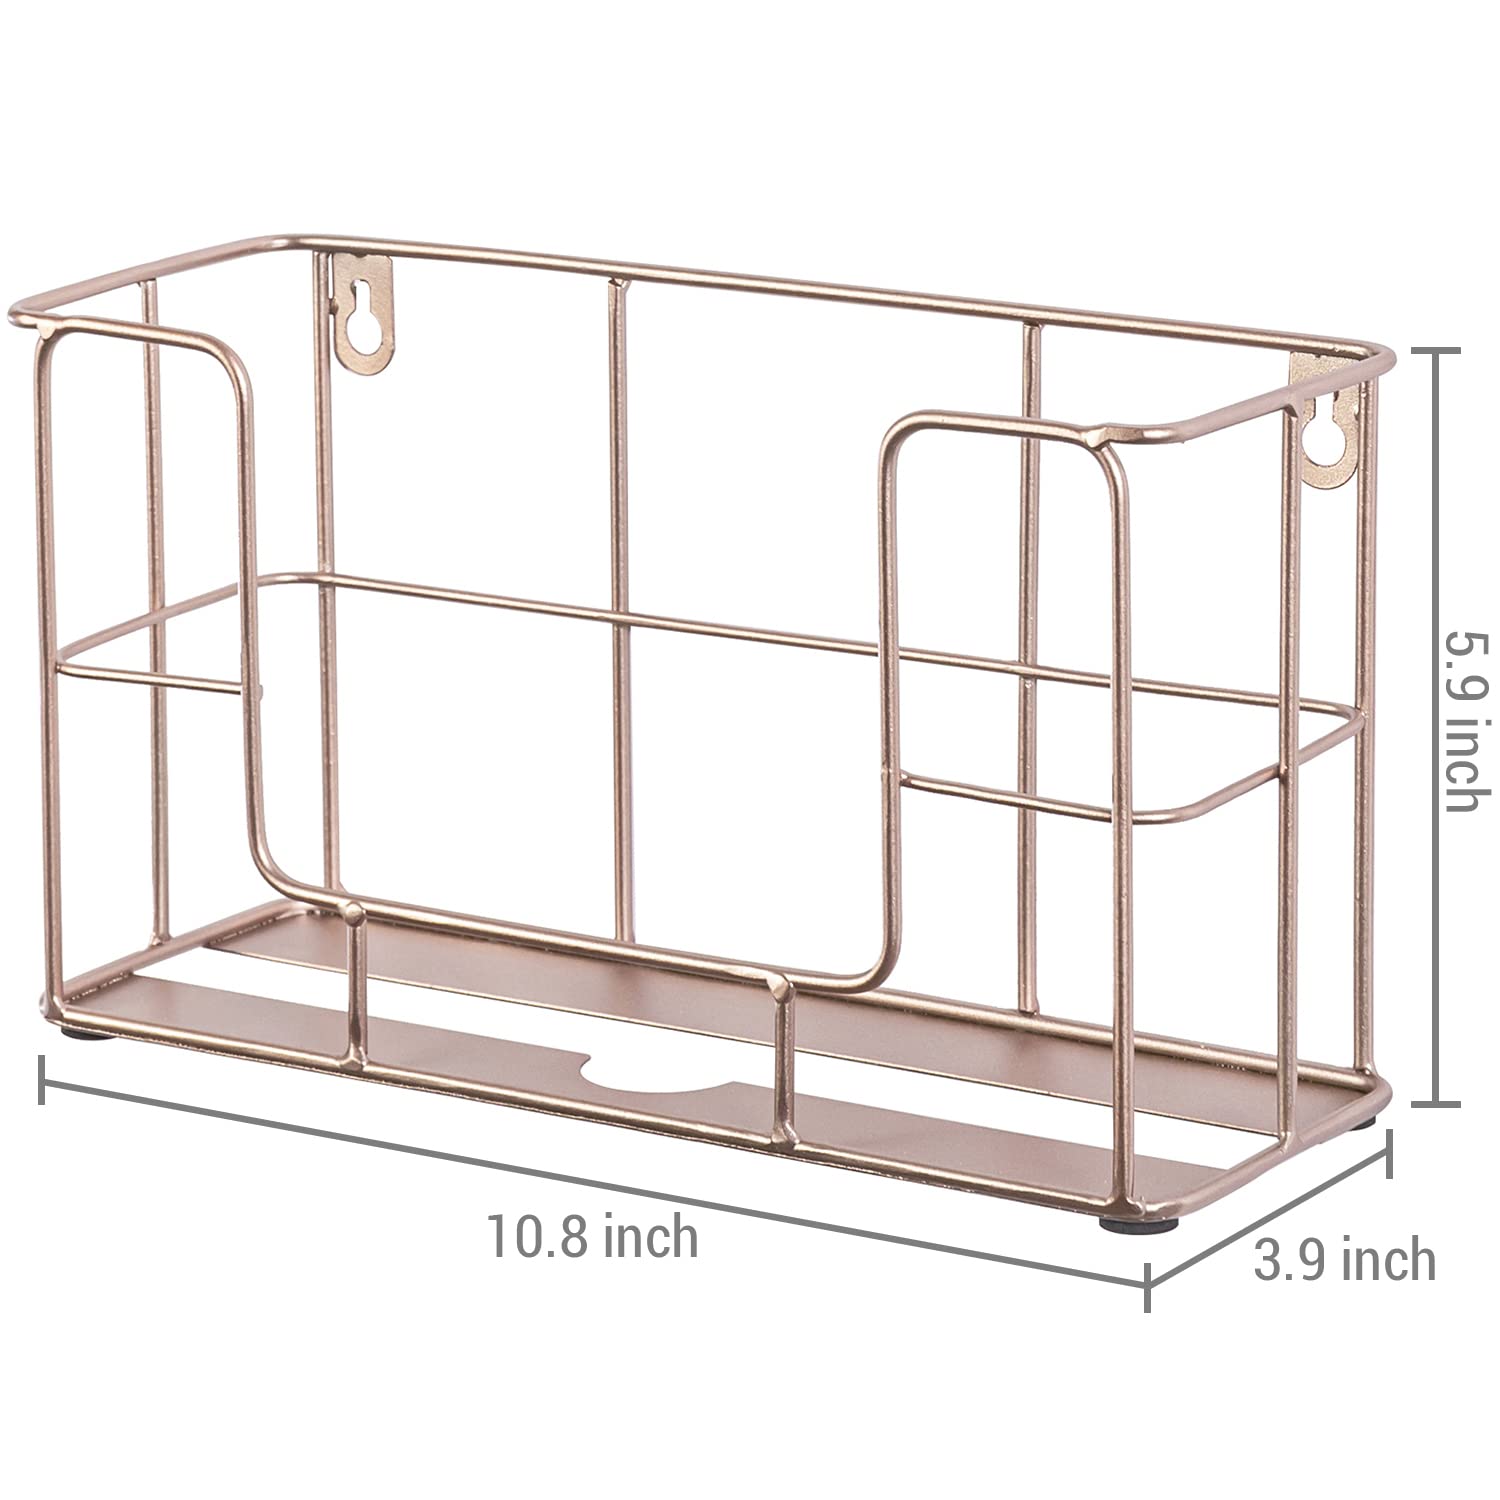 MyGift Wall Mountable Copper Tone Metal Wire Dispenser for Z-Fold, C-Fold and Trifold Paper Towels, Tabletop or Hanging Folded Disposable Hand Towel Tray Holder Rack